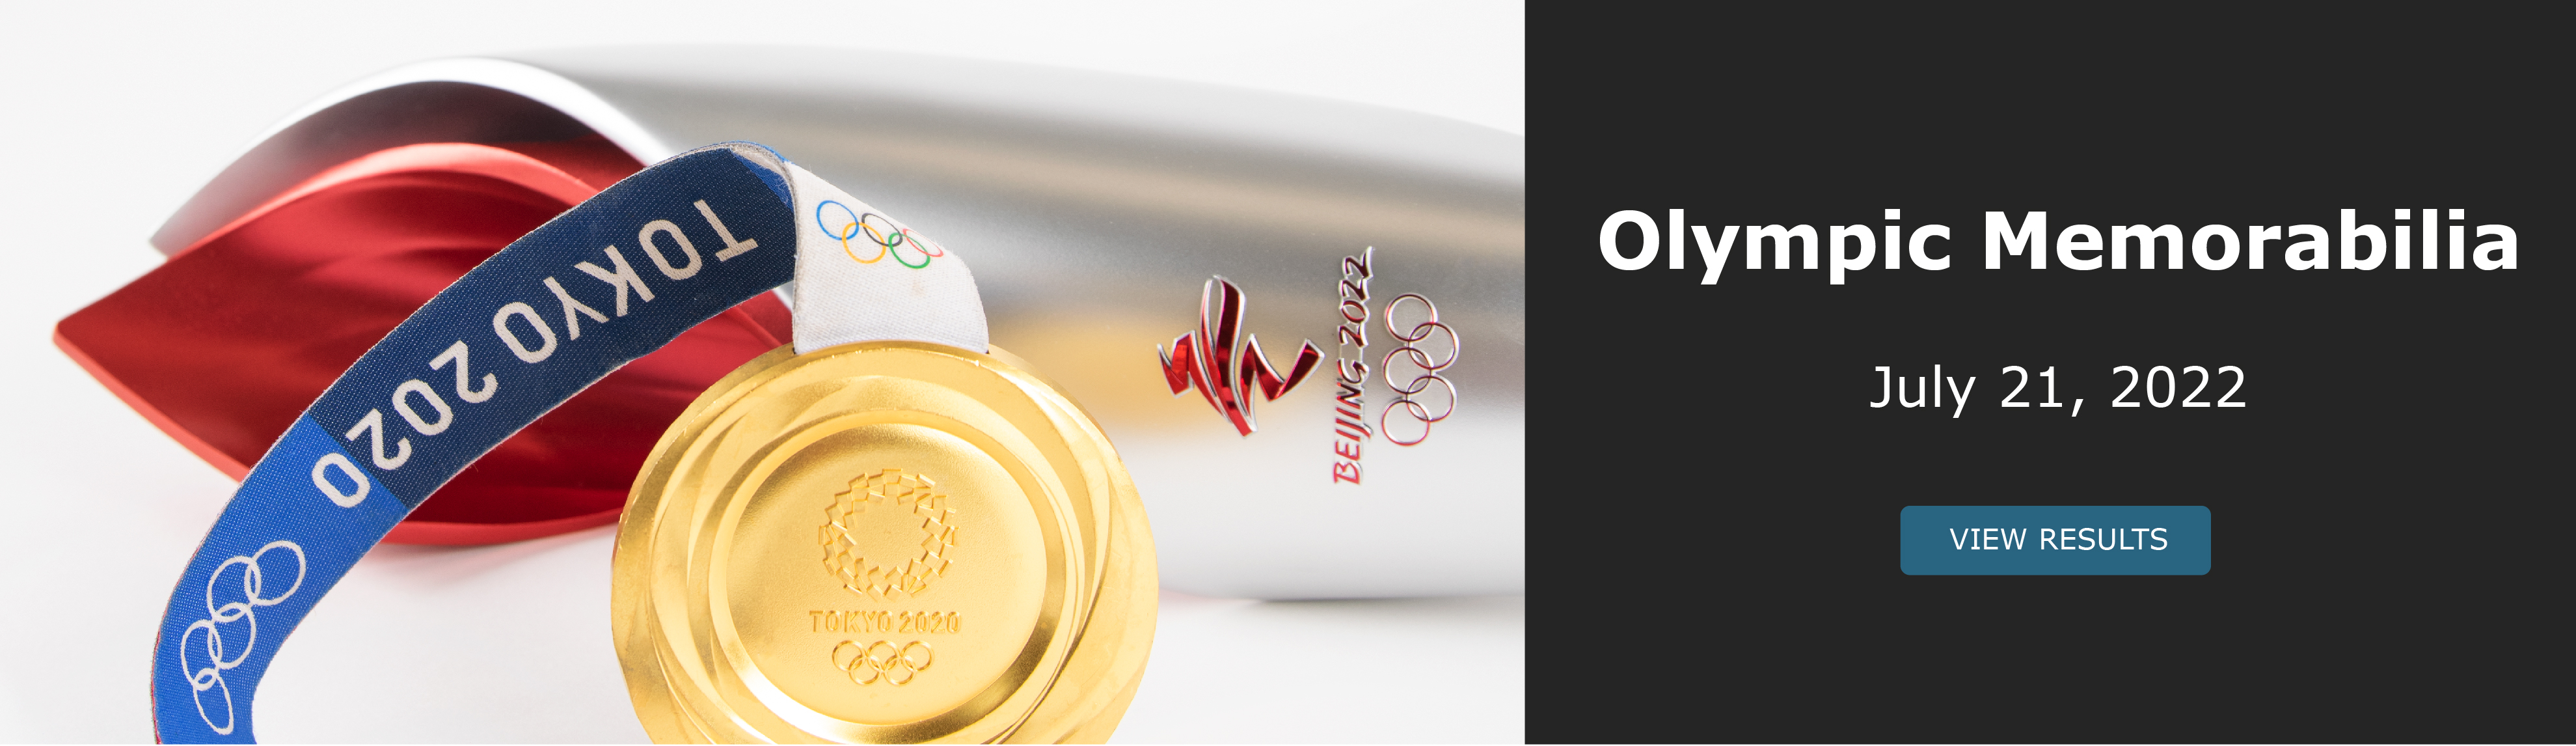 Olympic Memorabilia auction closed July 21. View Results!